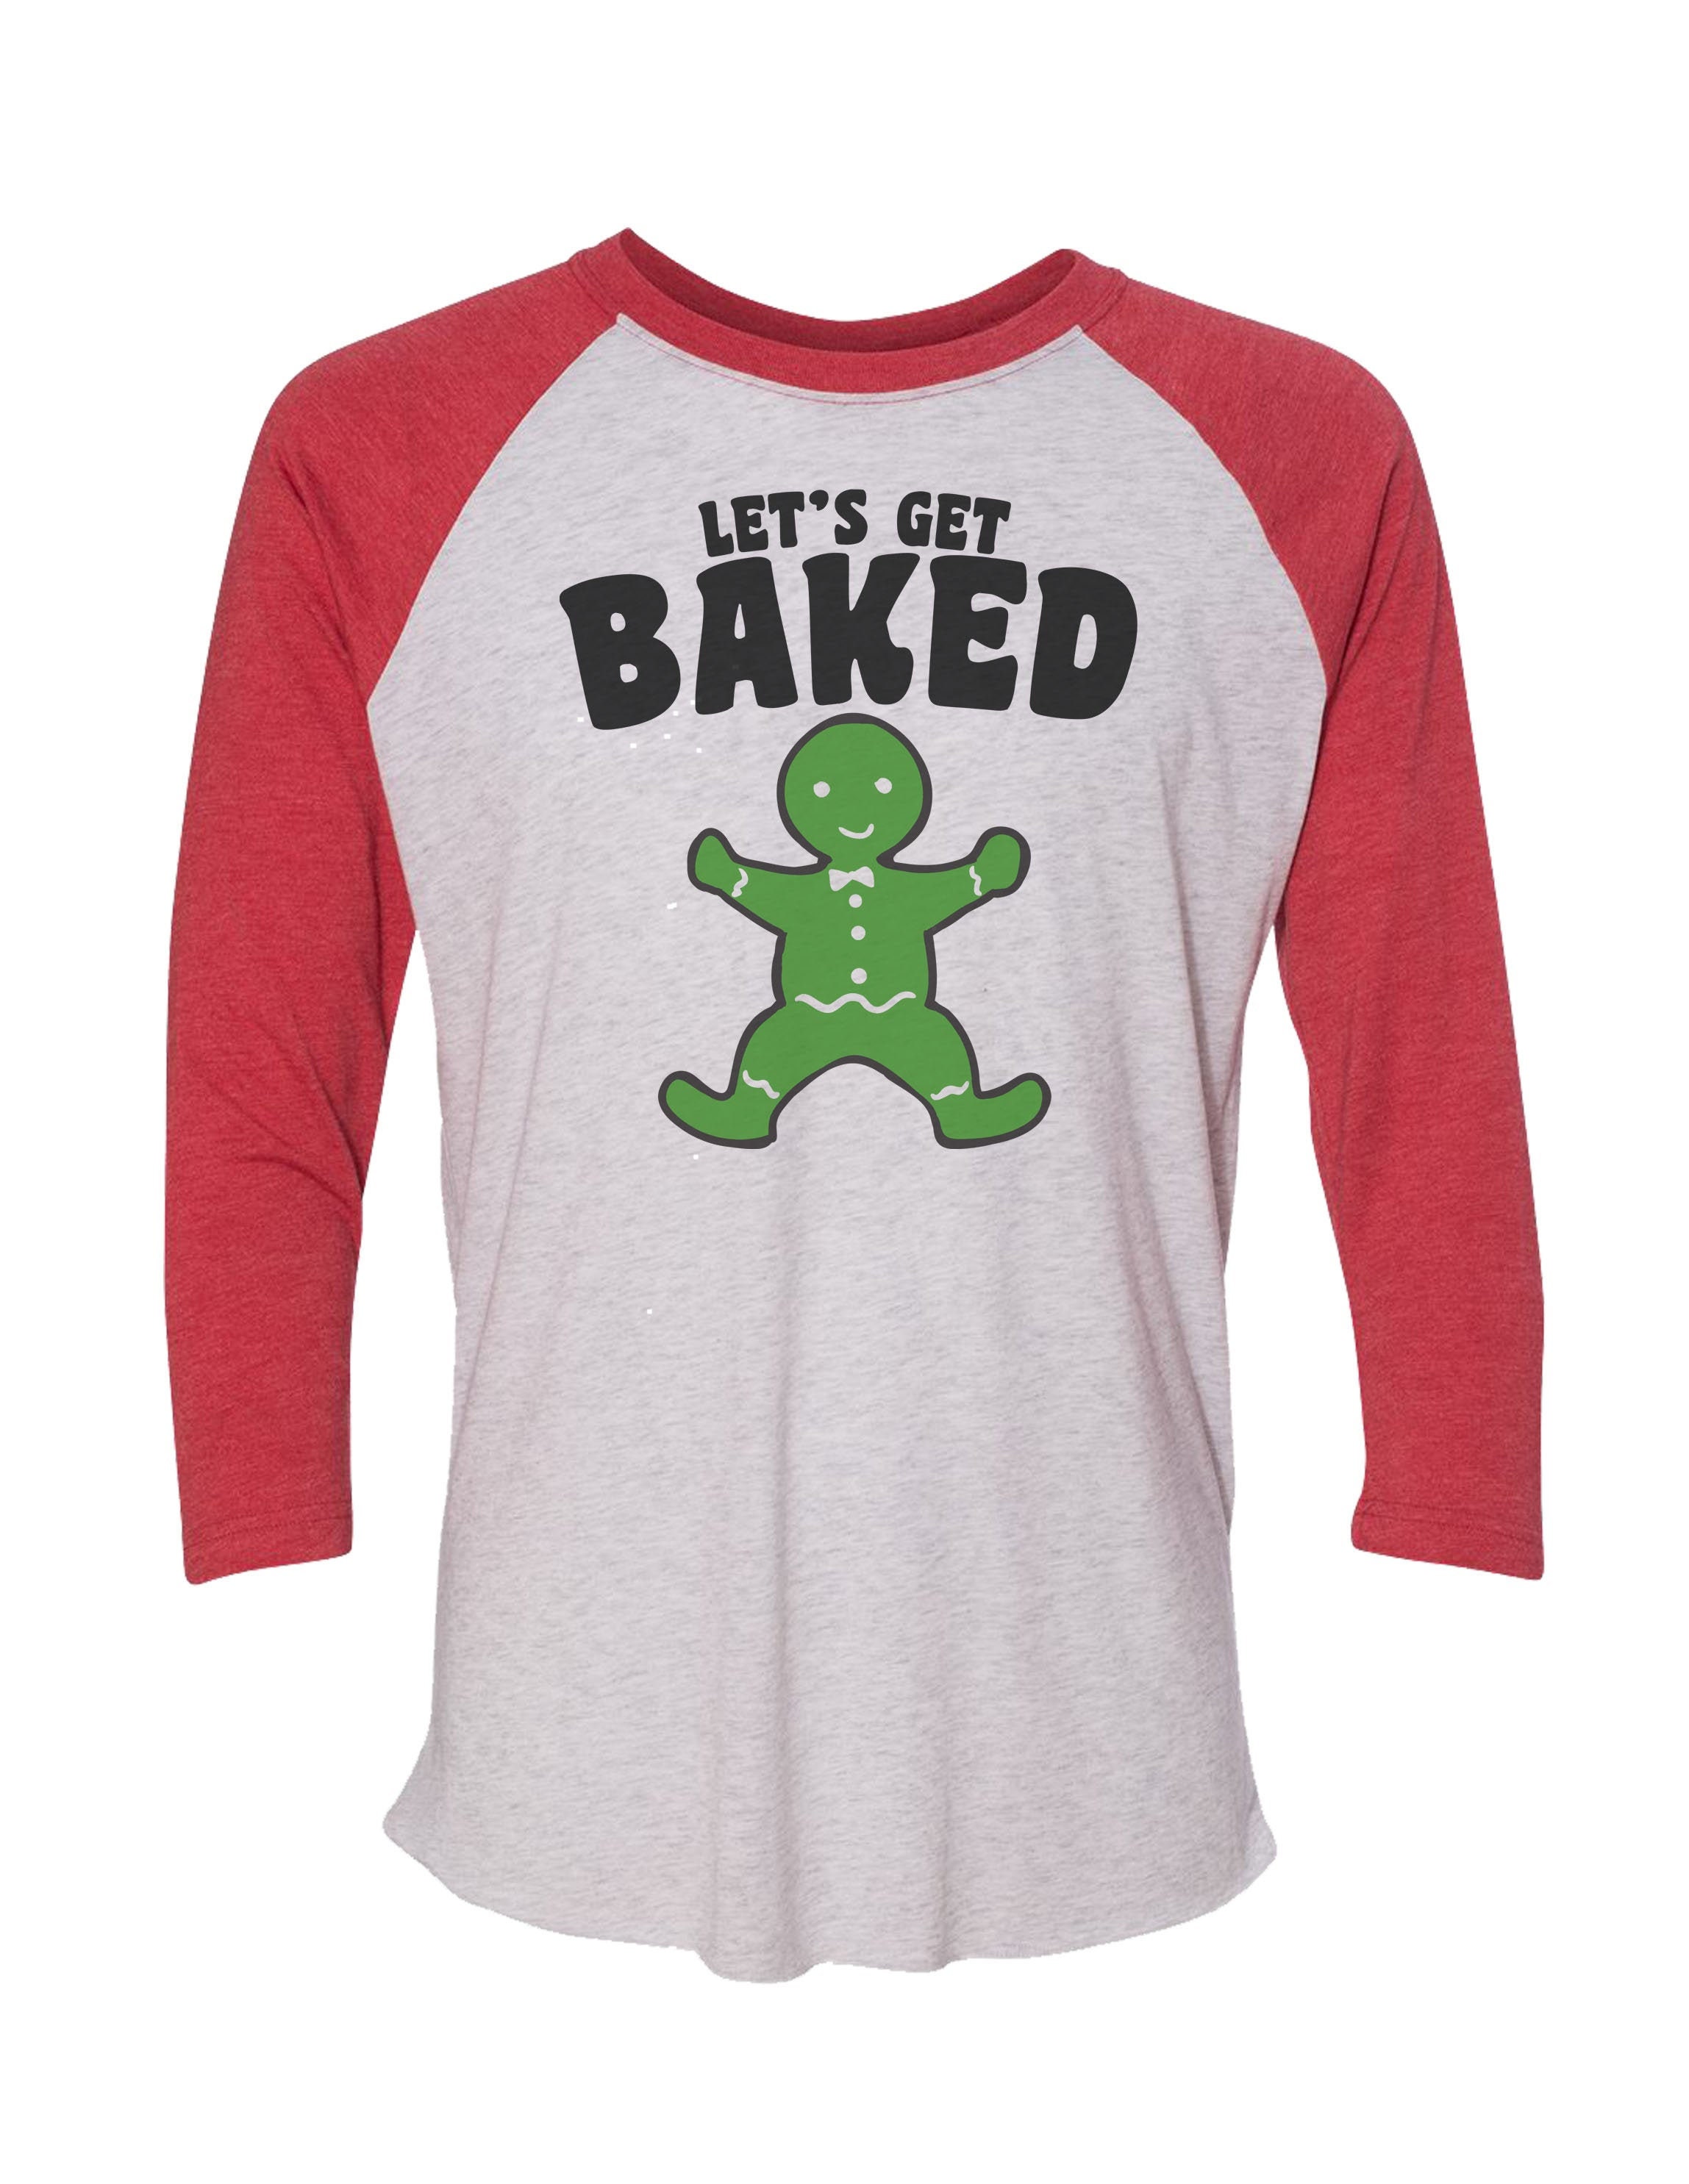 Unisex Christmas Super Soft Tri-Blend Baseball Style Shirt Lets Get Baked Funny Ugly Sweater Holiday Party - 1056"